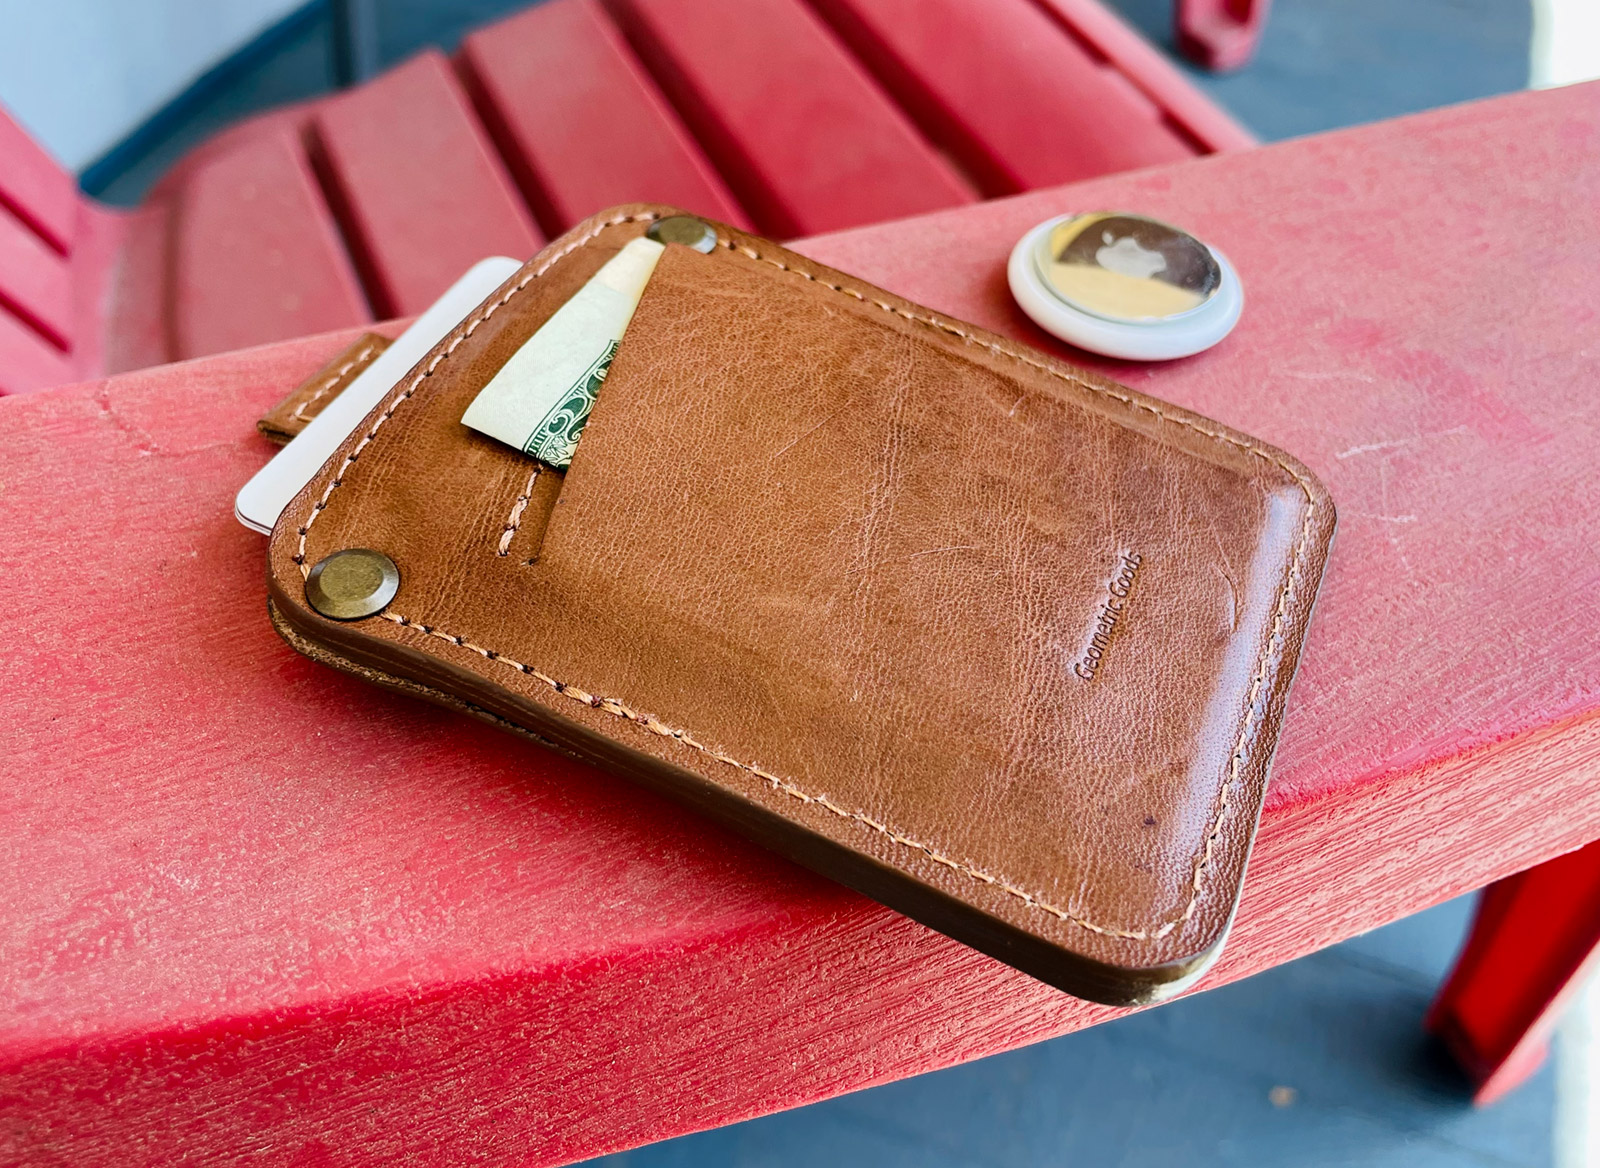 Geometric Goods “The Minimalist” Leather AirTag wallet review - Never leave  home without it - The Gadgeteer